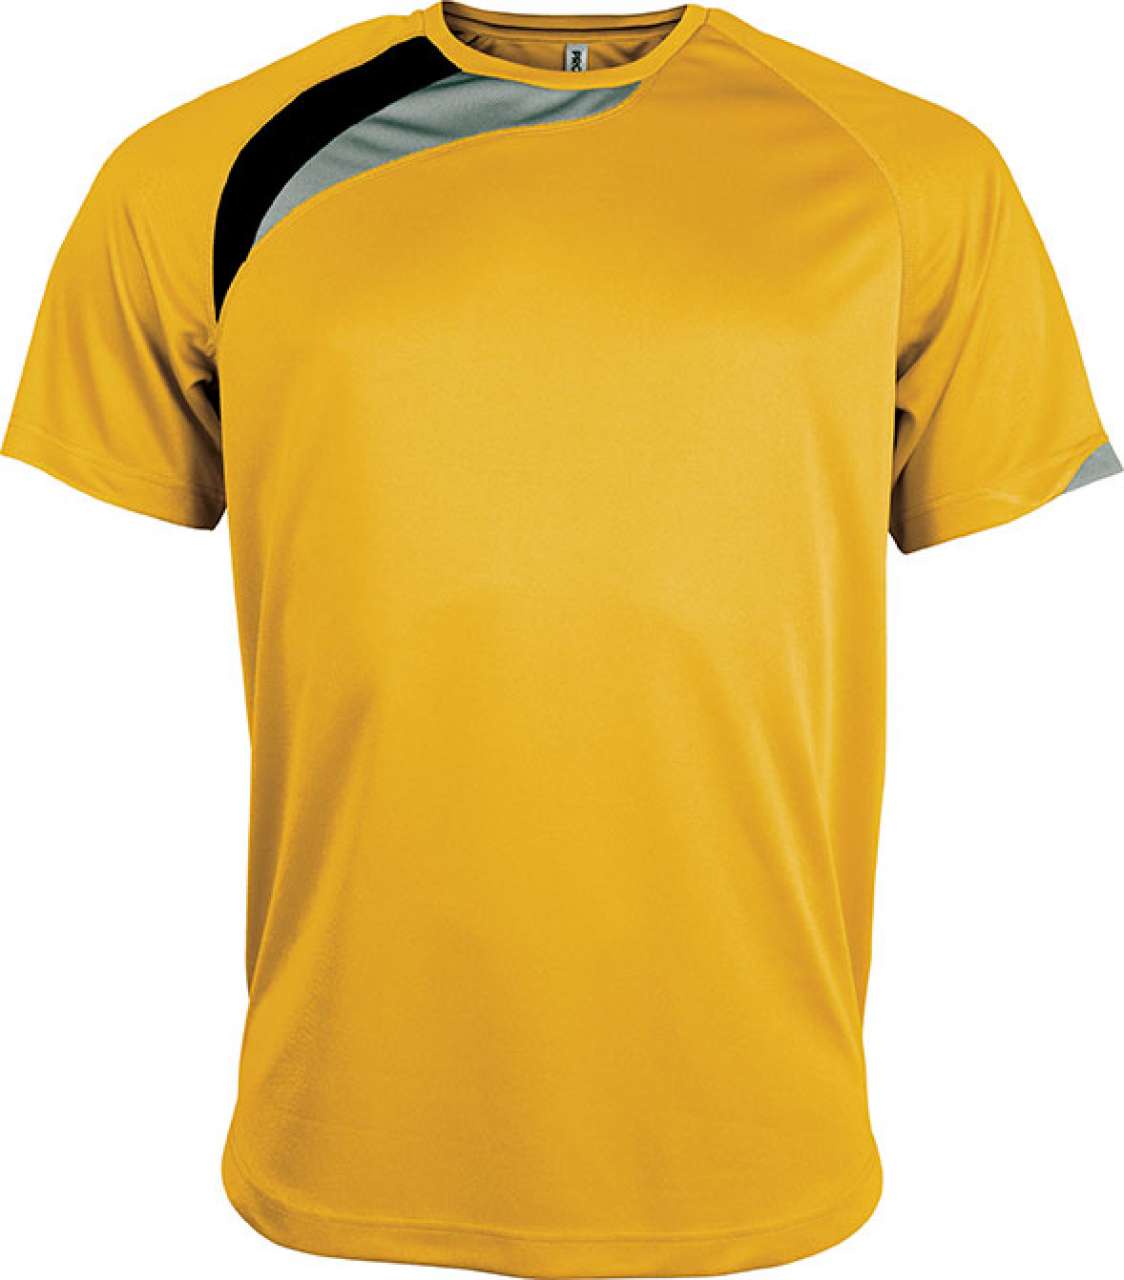 Promo  ADULTS SHORT-SLEEVED JERSEY